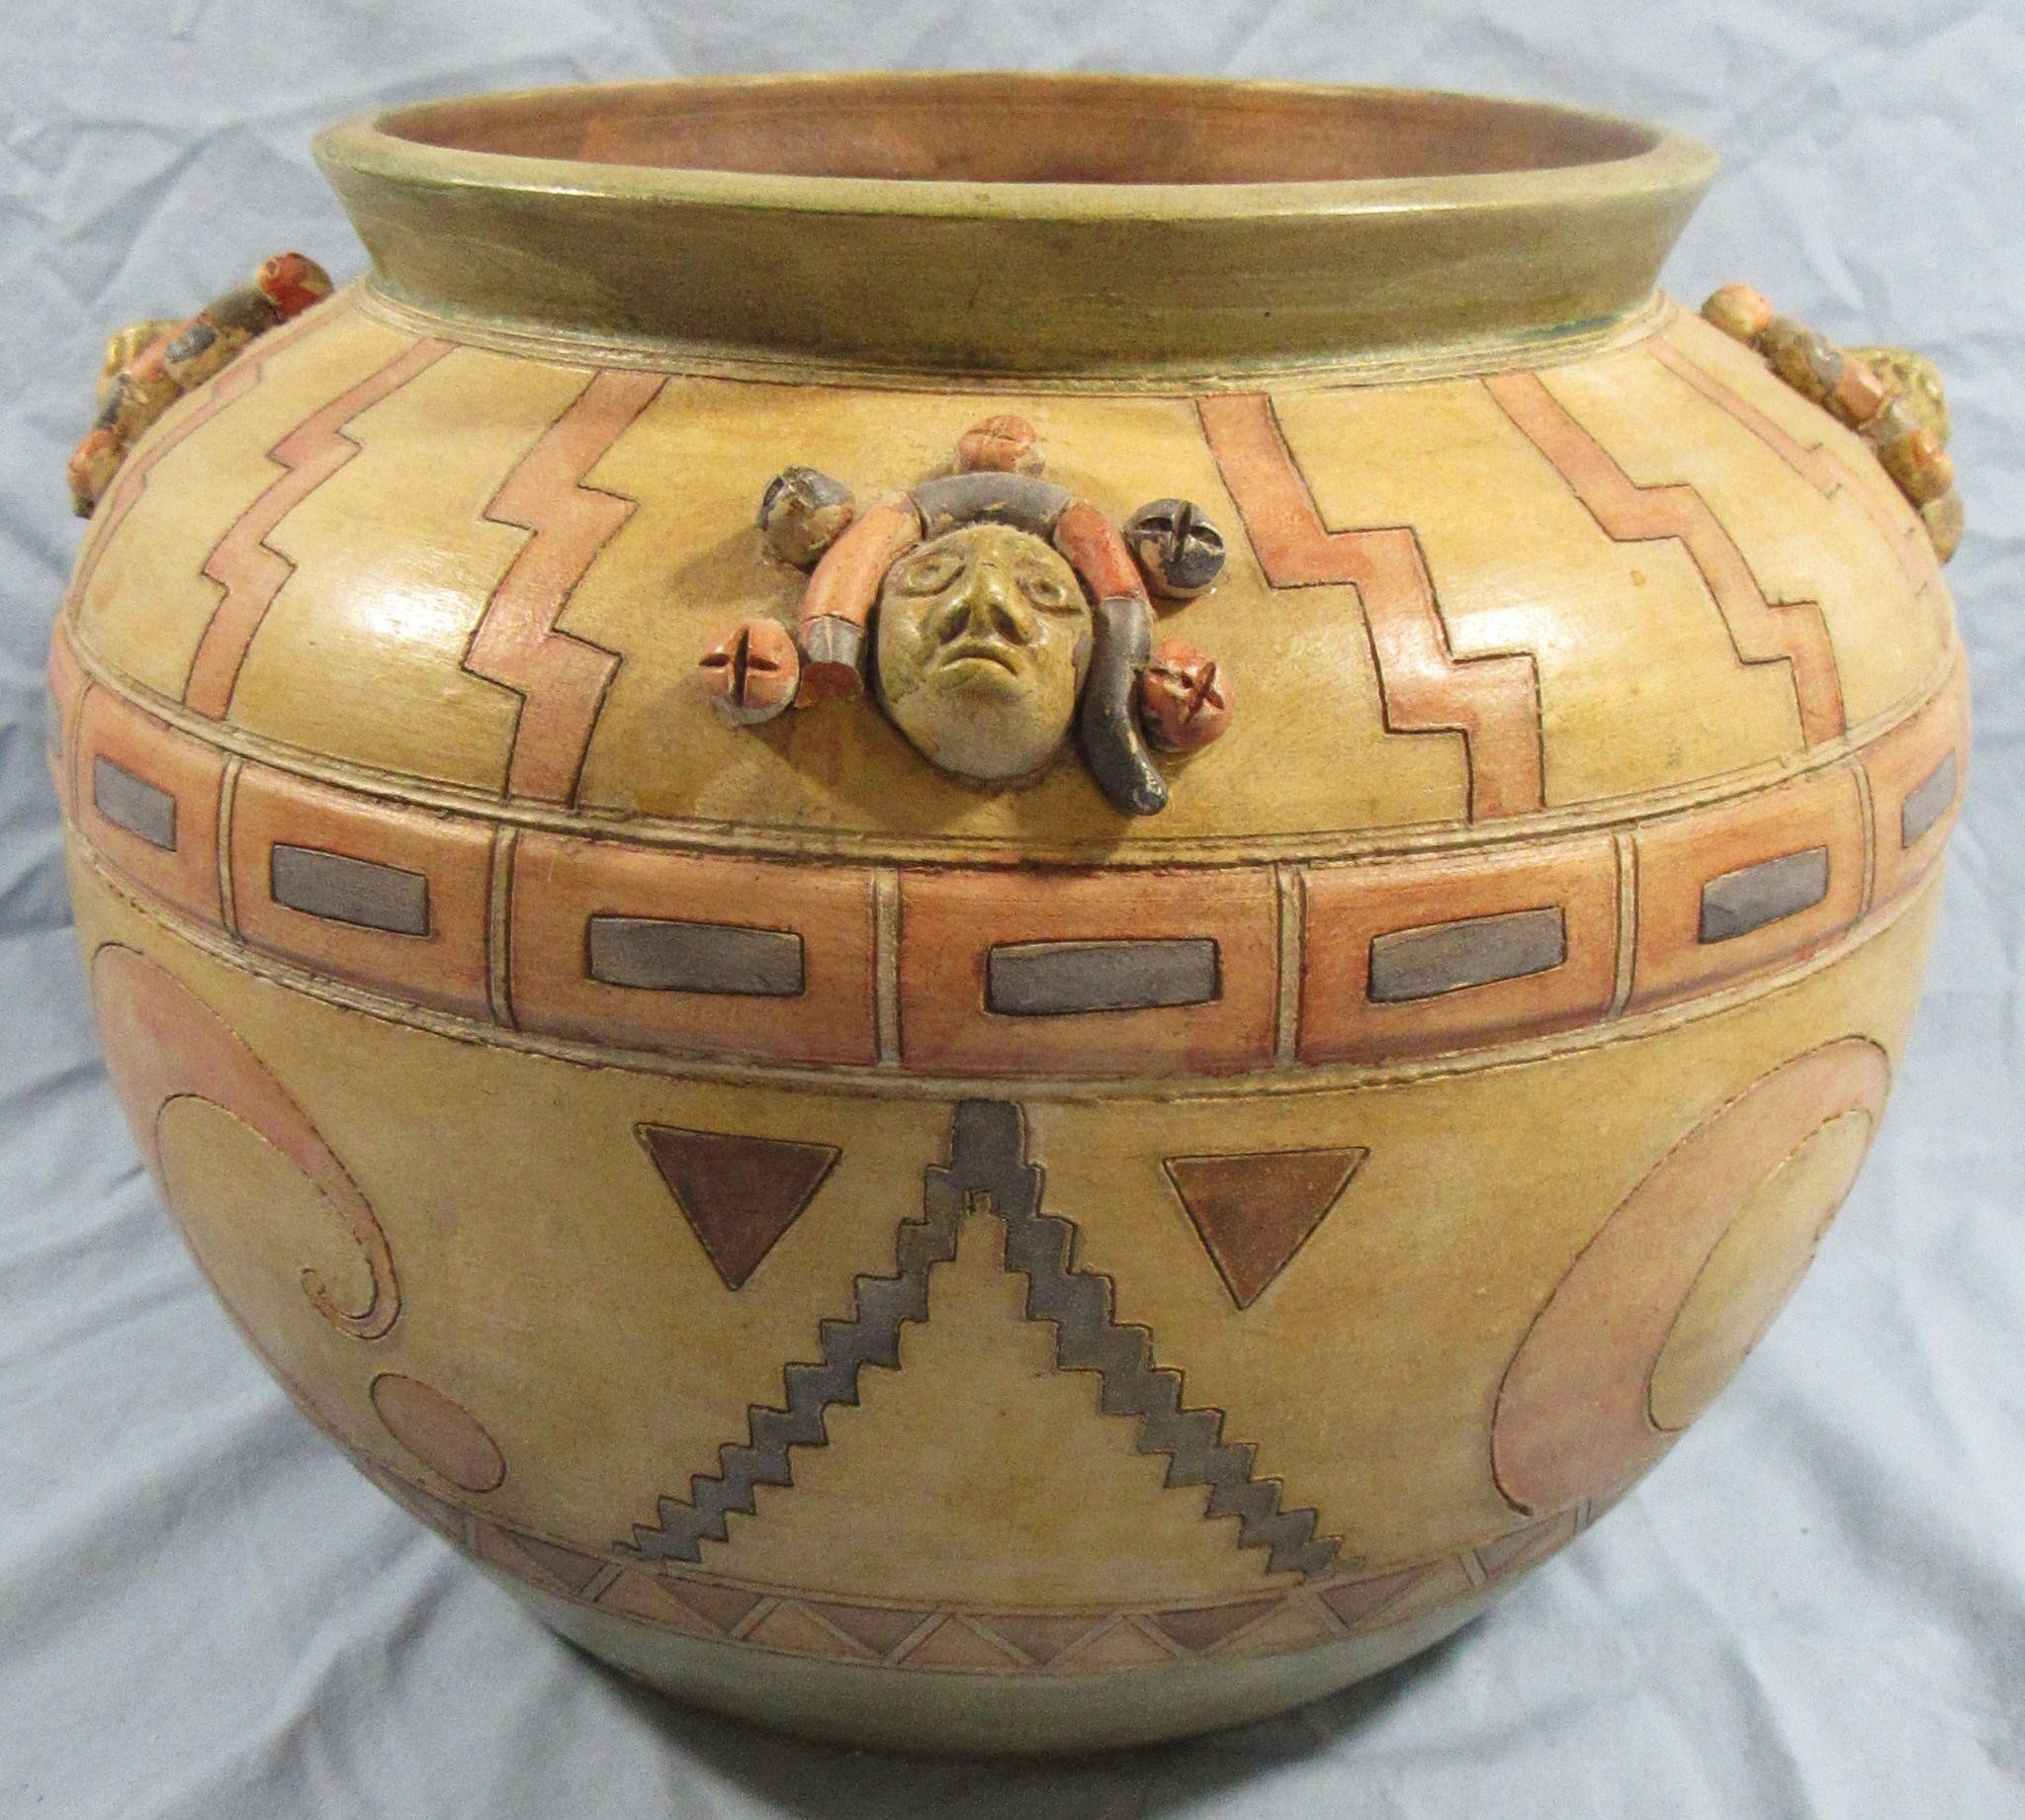 NATIVE AMERICAN STYLE BRASSCASTERS CLAY POT